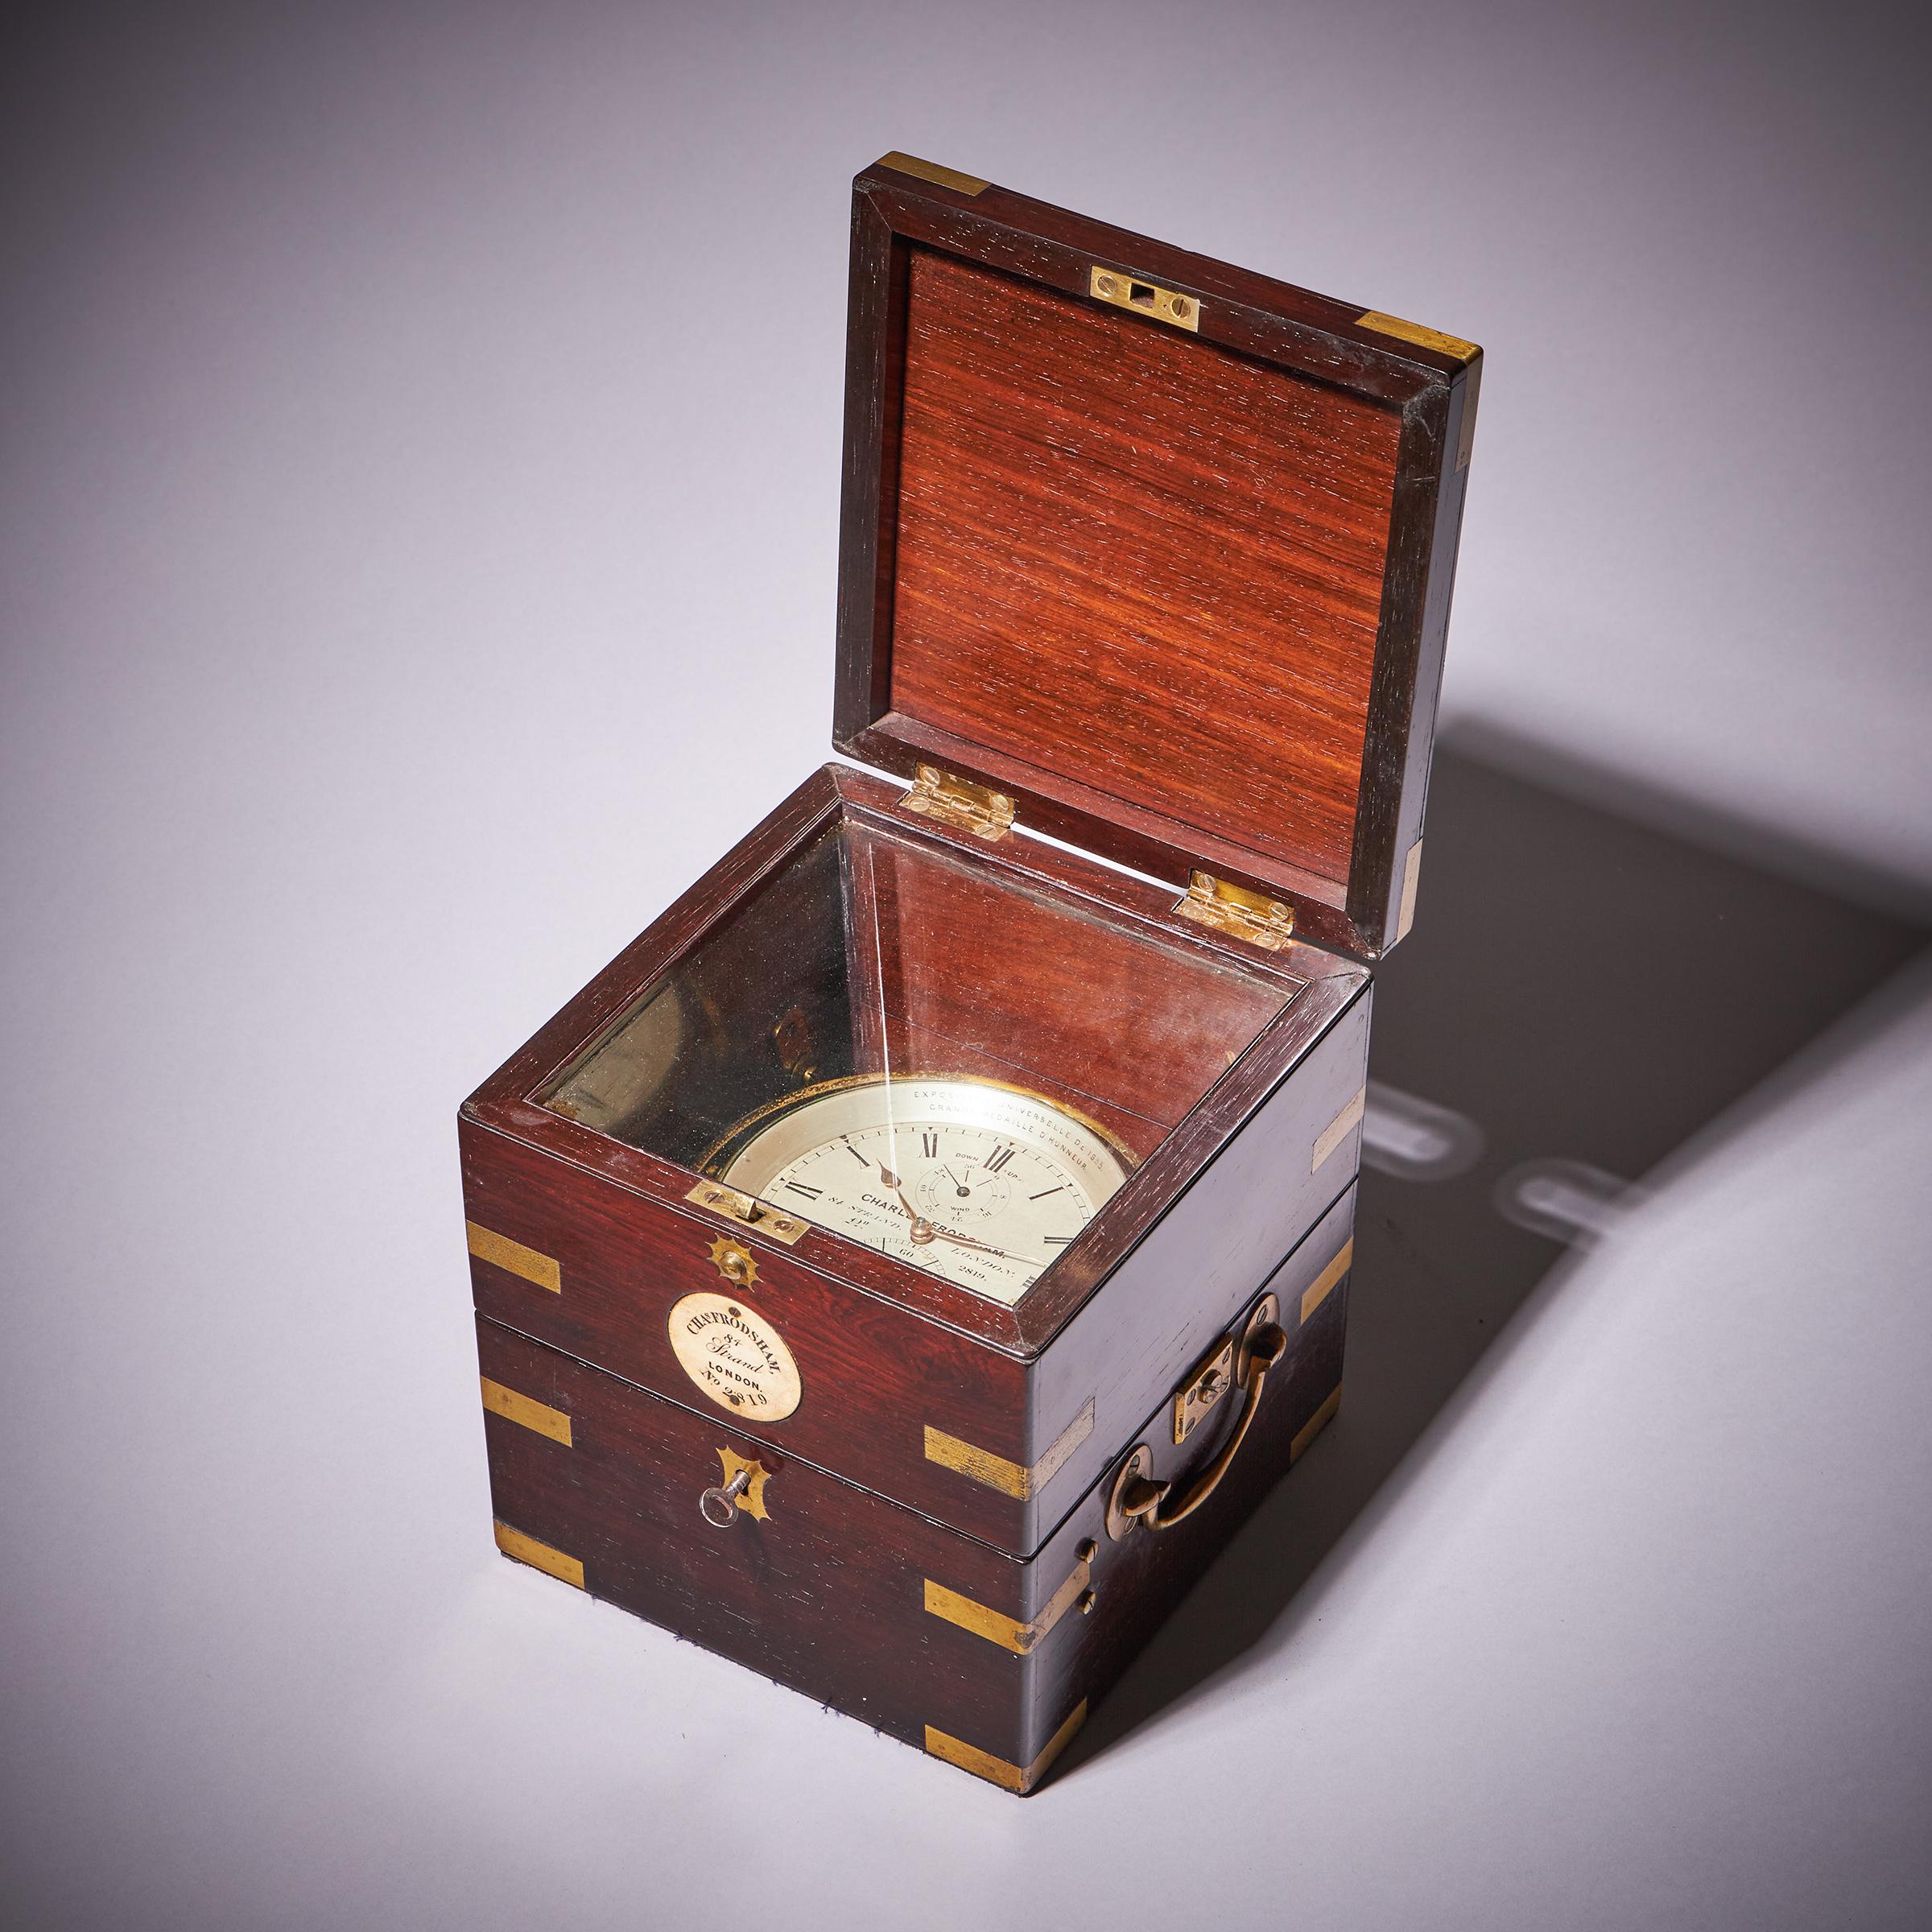 Fine Two-Day Marine Chronometer Signed Charles Frodsham In Good Condition For Sale In Oxfordshire, United Kingdom